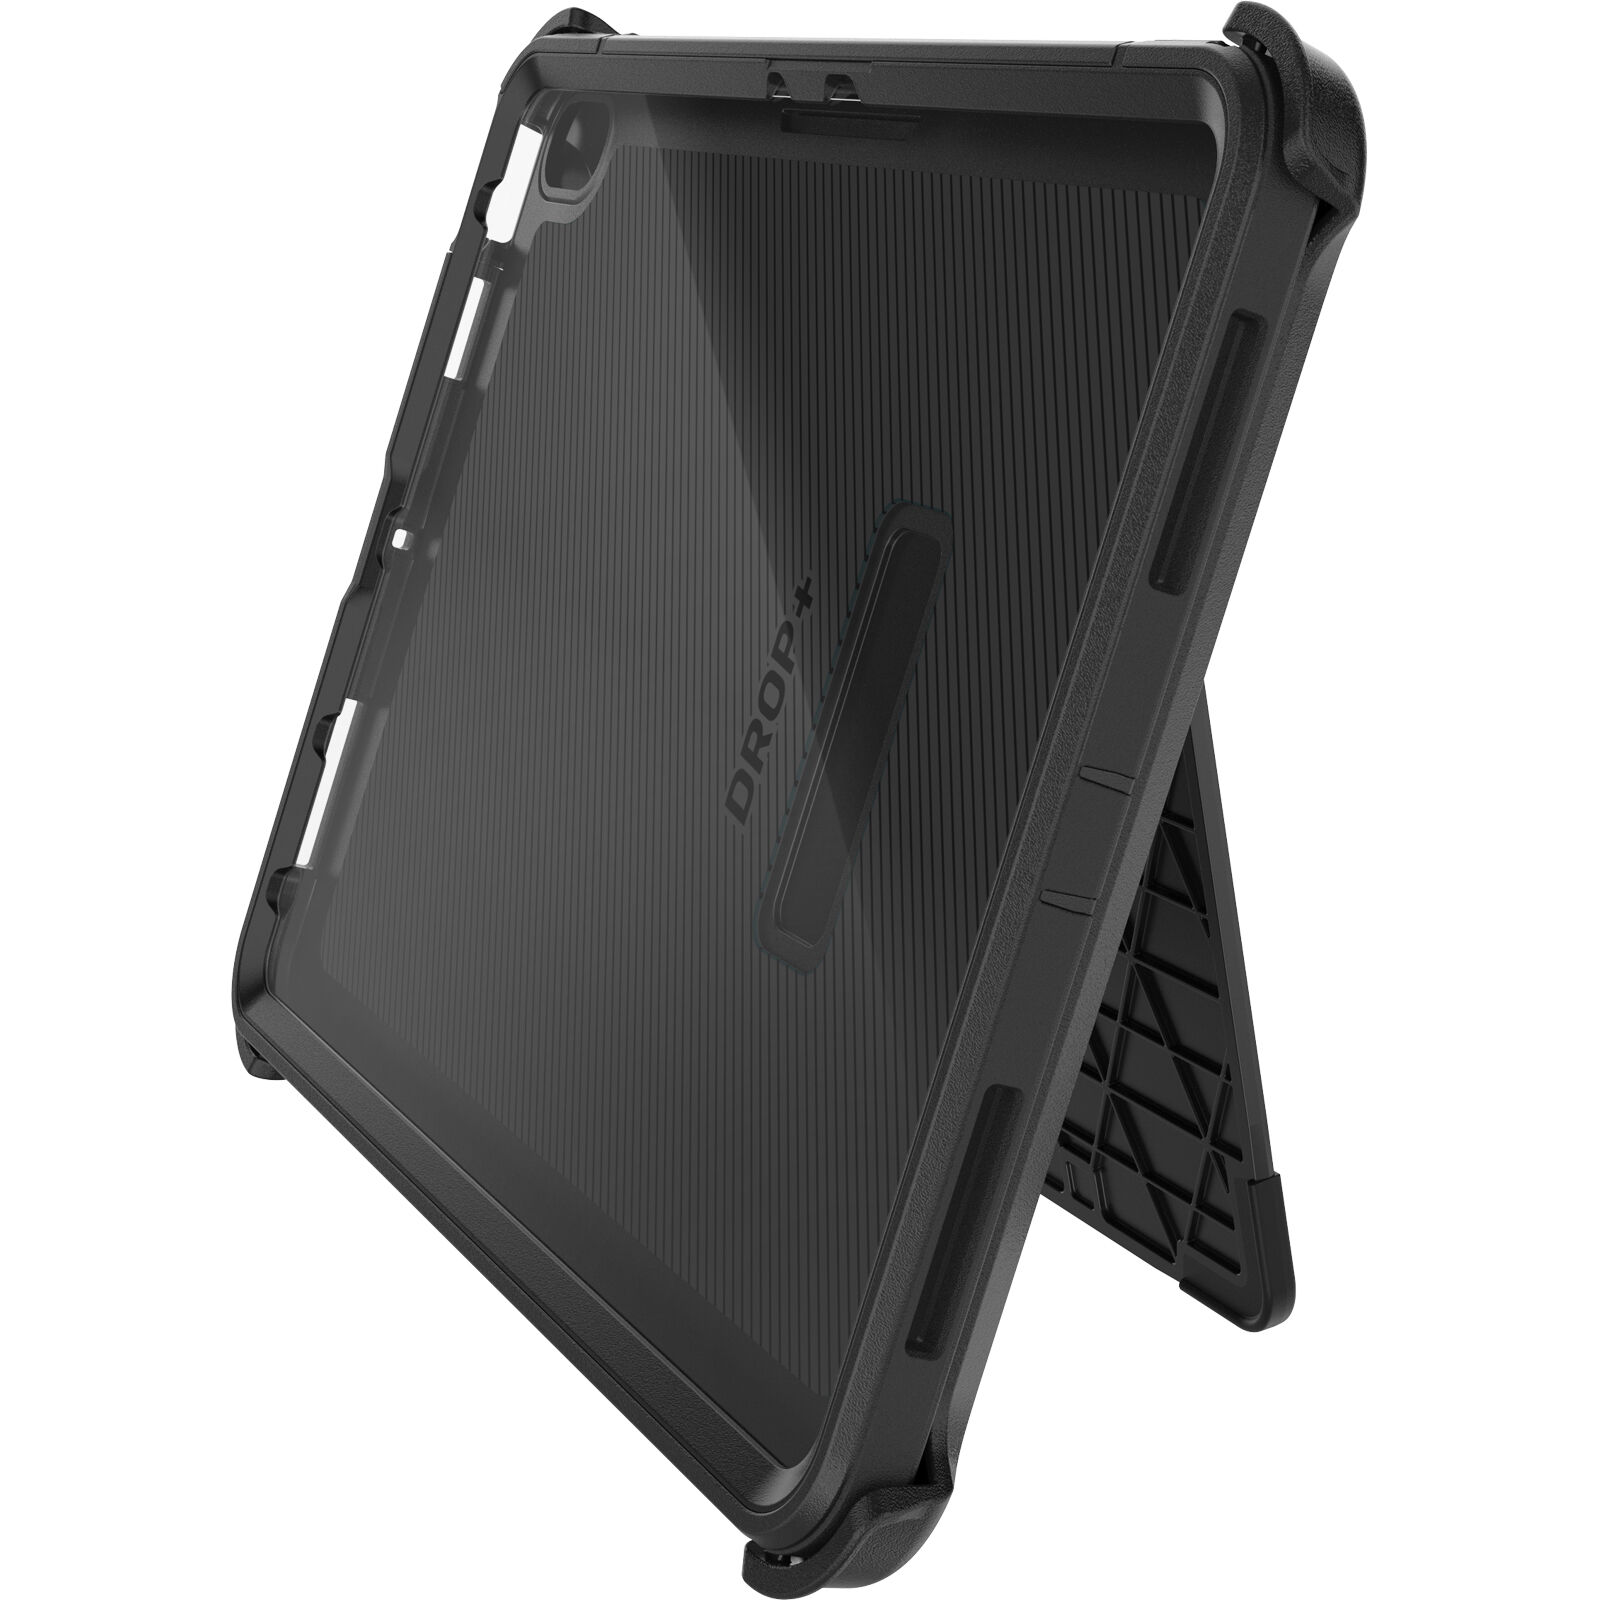 Black Protective iPad Air 11-inch (M2) Case | OtterBox